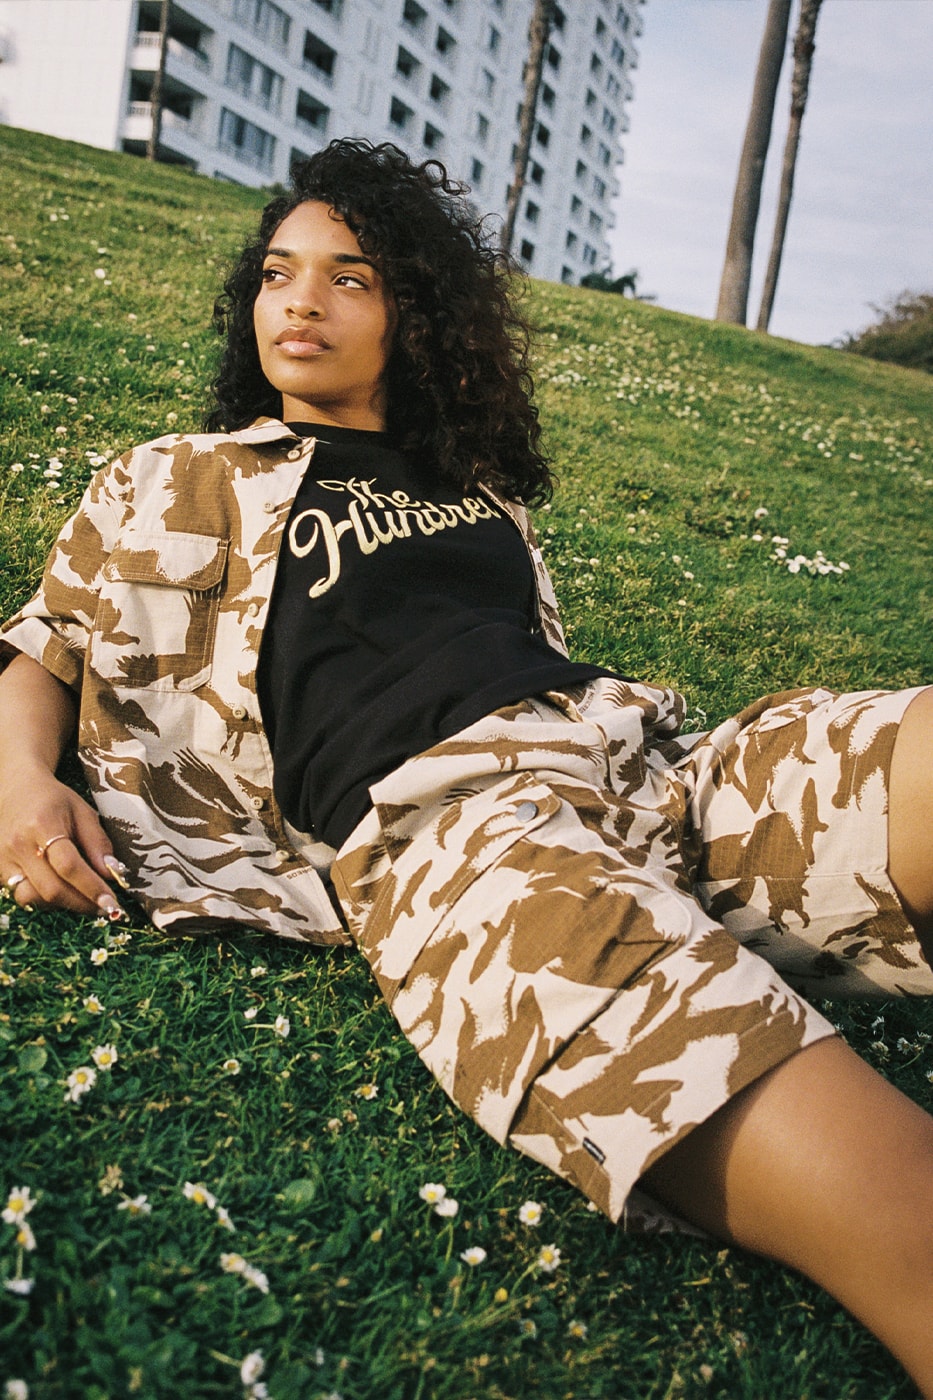 The Hundreds Drops Summer 2023 Collection graphic t-shirts early 2000s streetwear bold all over prints hawaiian shirts camo prints